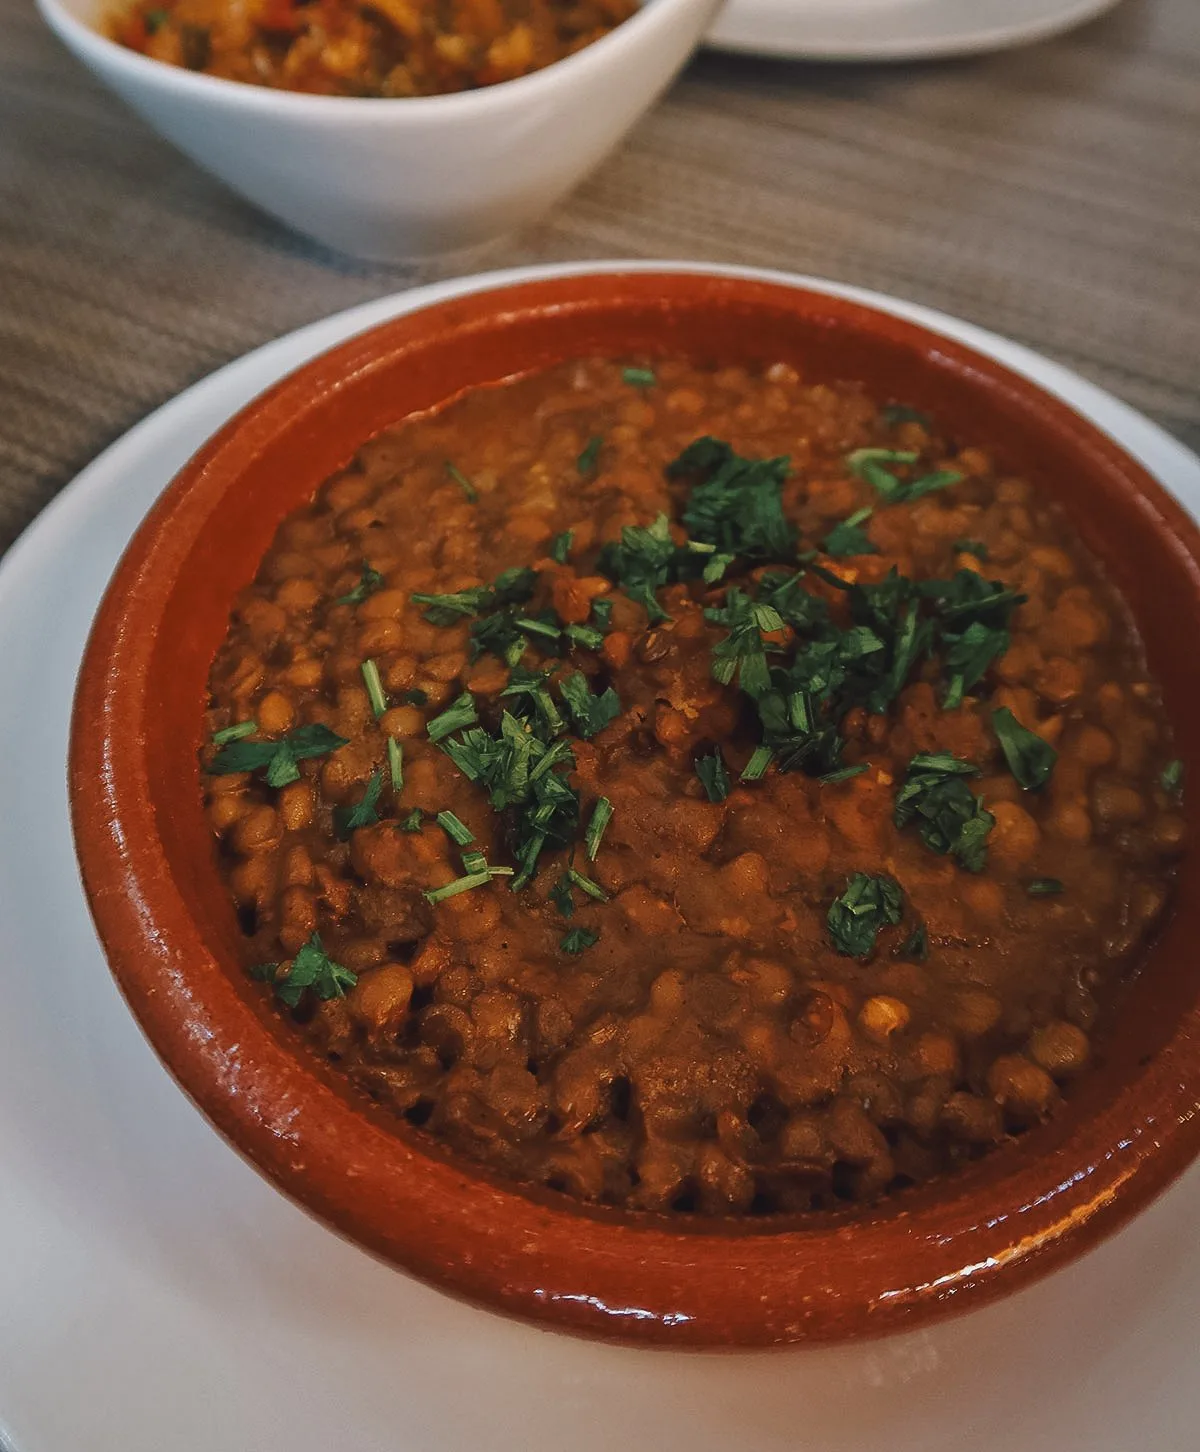 Moroccan stewed lentils at a restaurant in Rabat